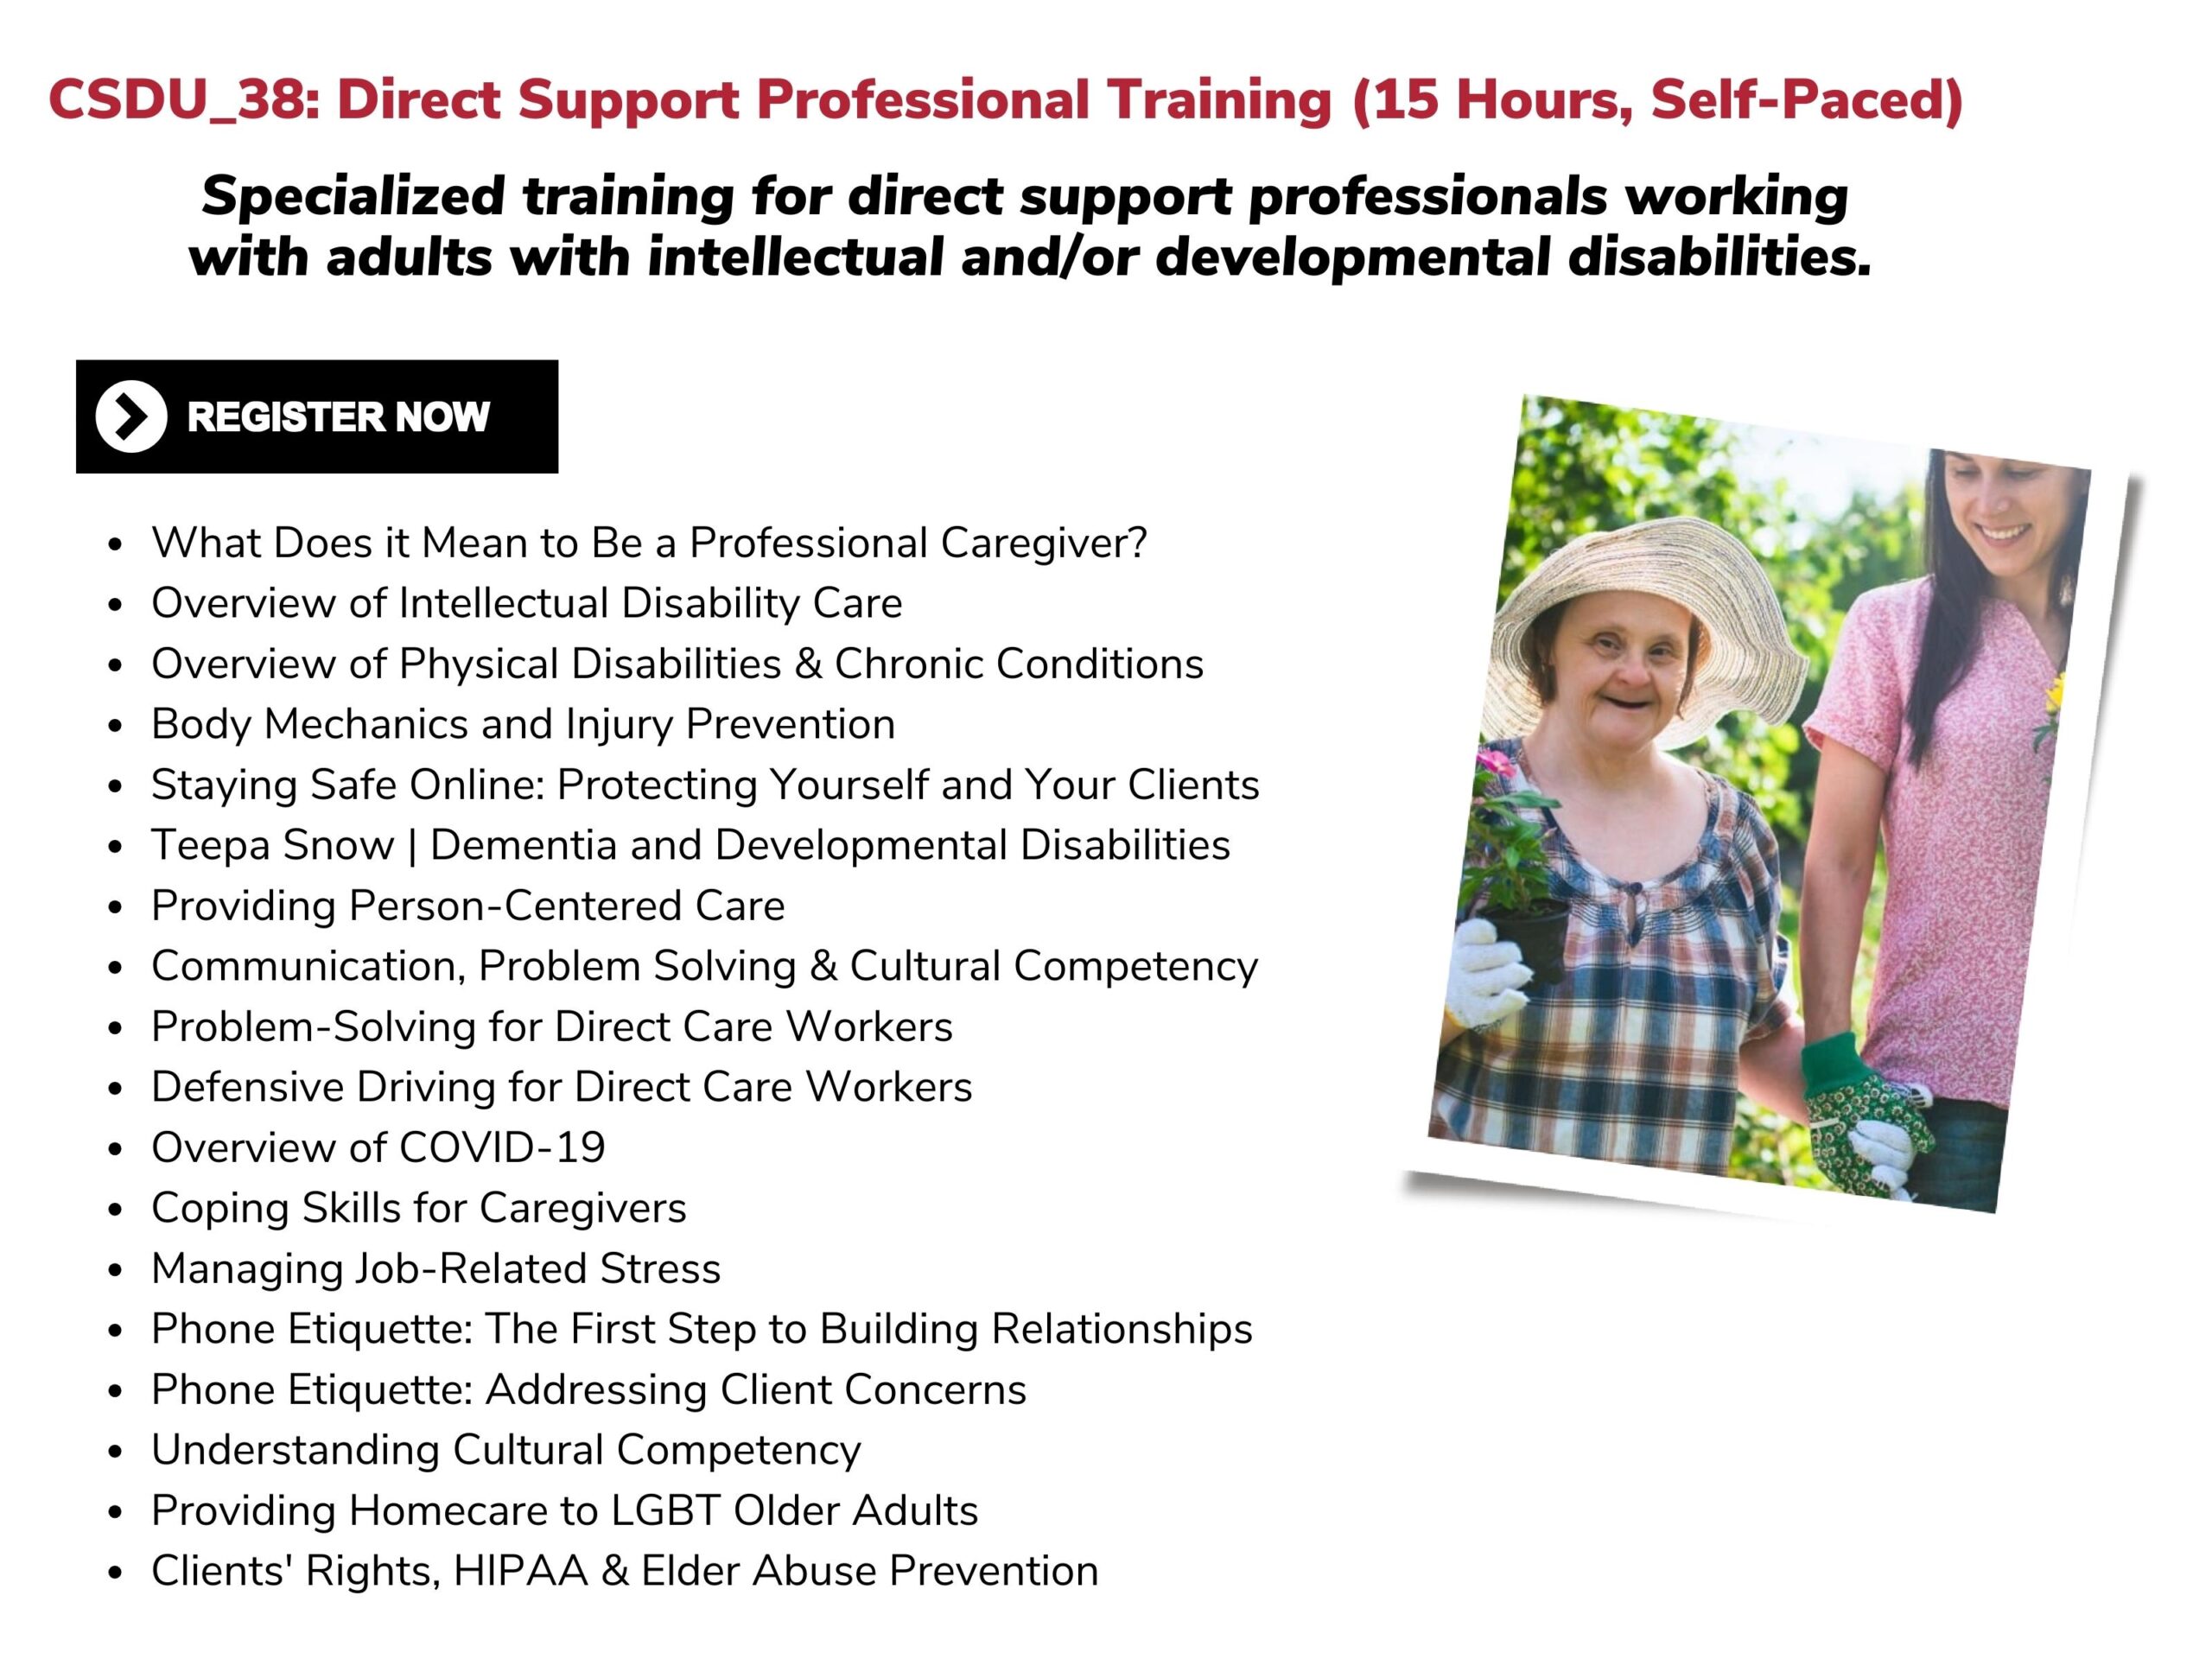 CSDU_38: Direct Support Professional Training (15-hours, Self-Paced)